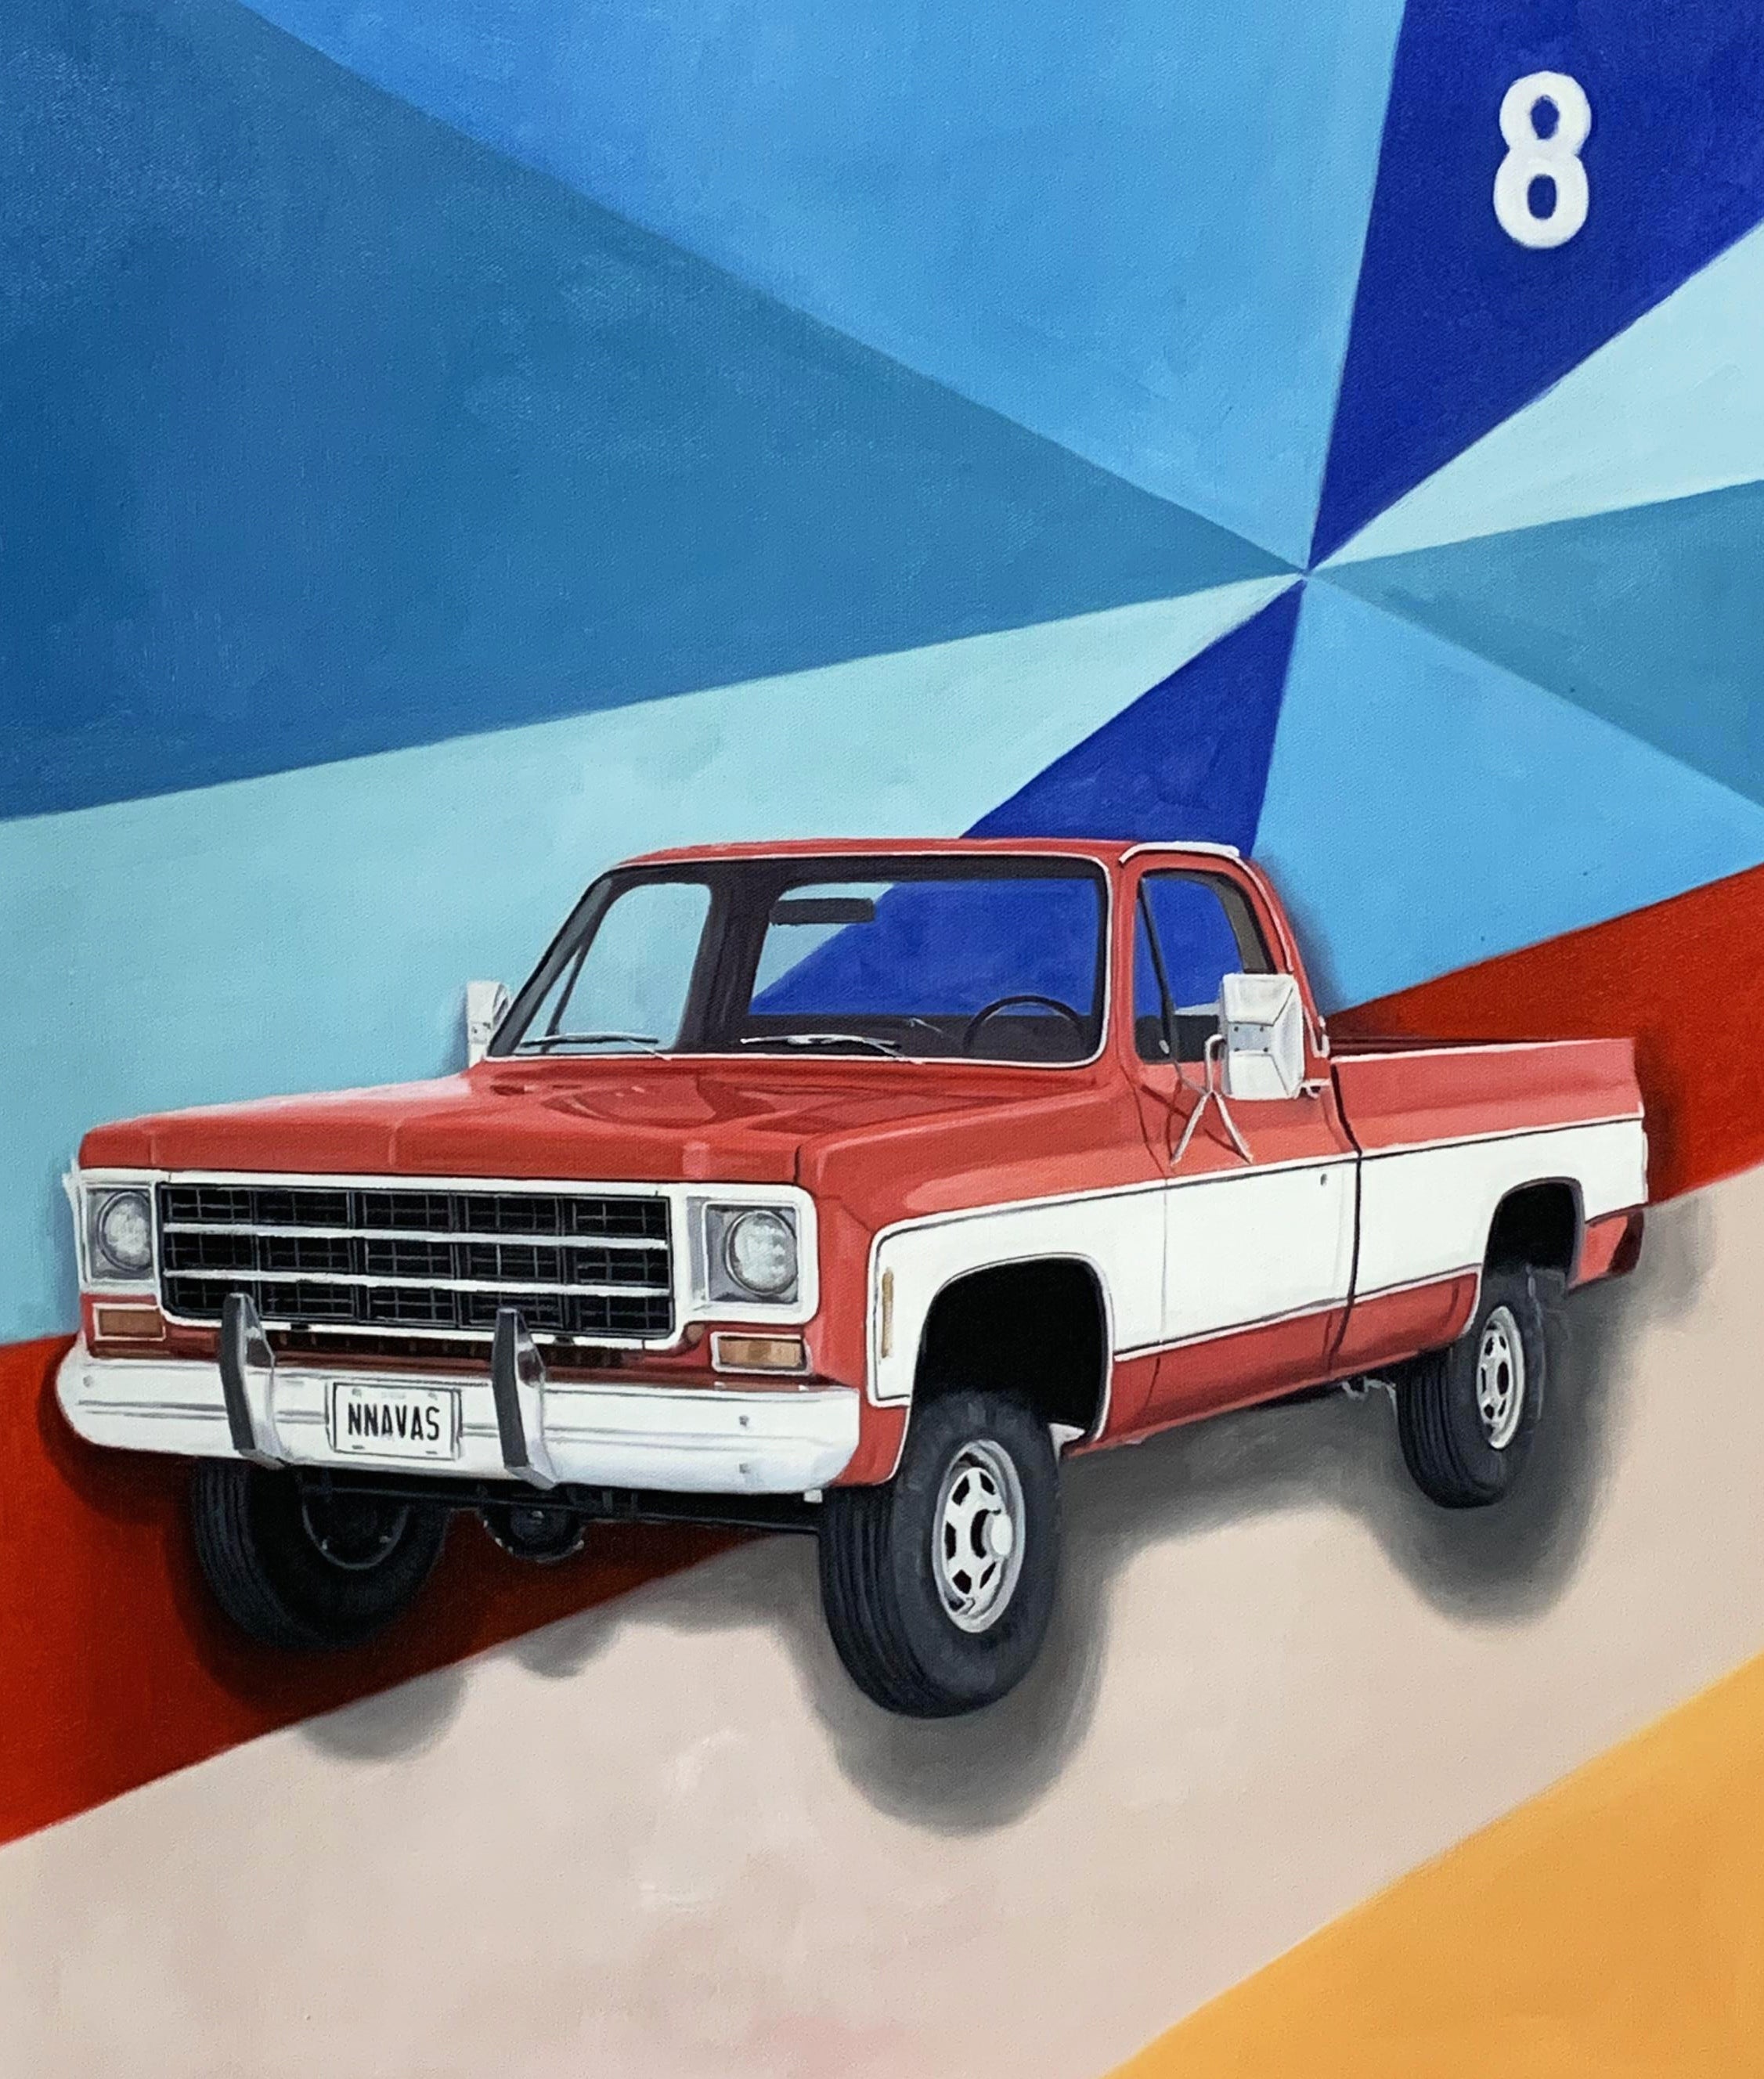 Commission a custom painting of your car